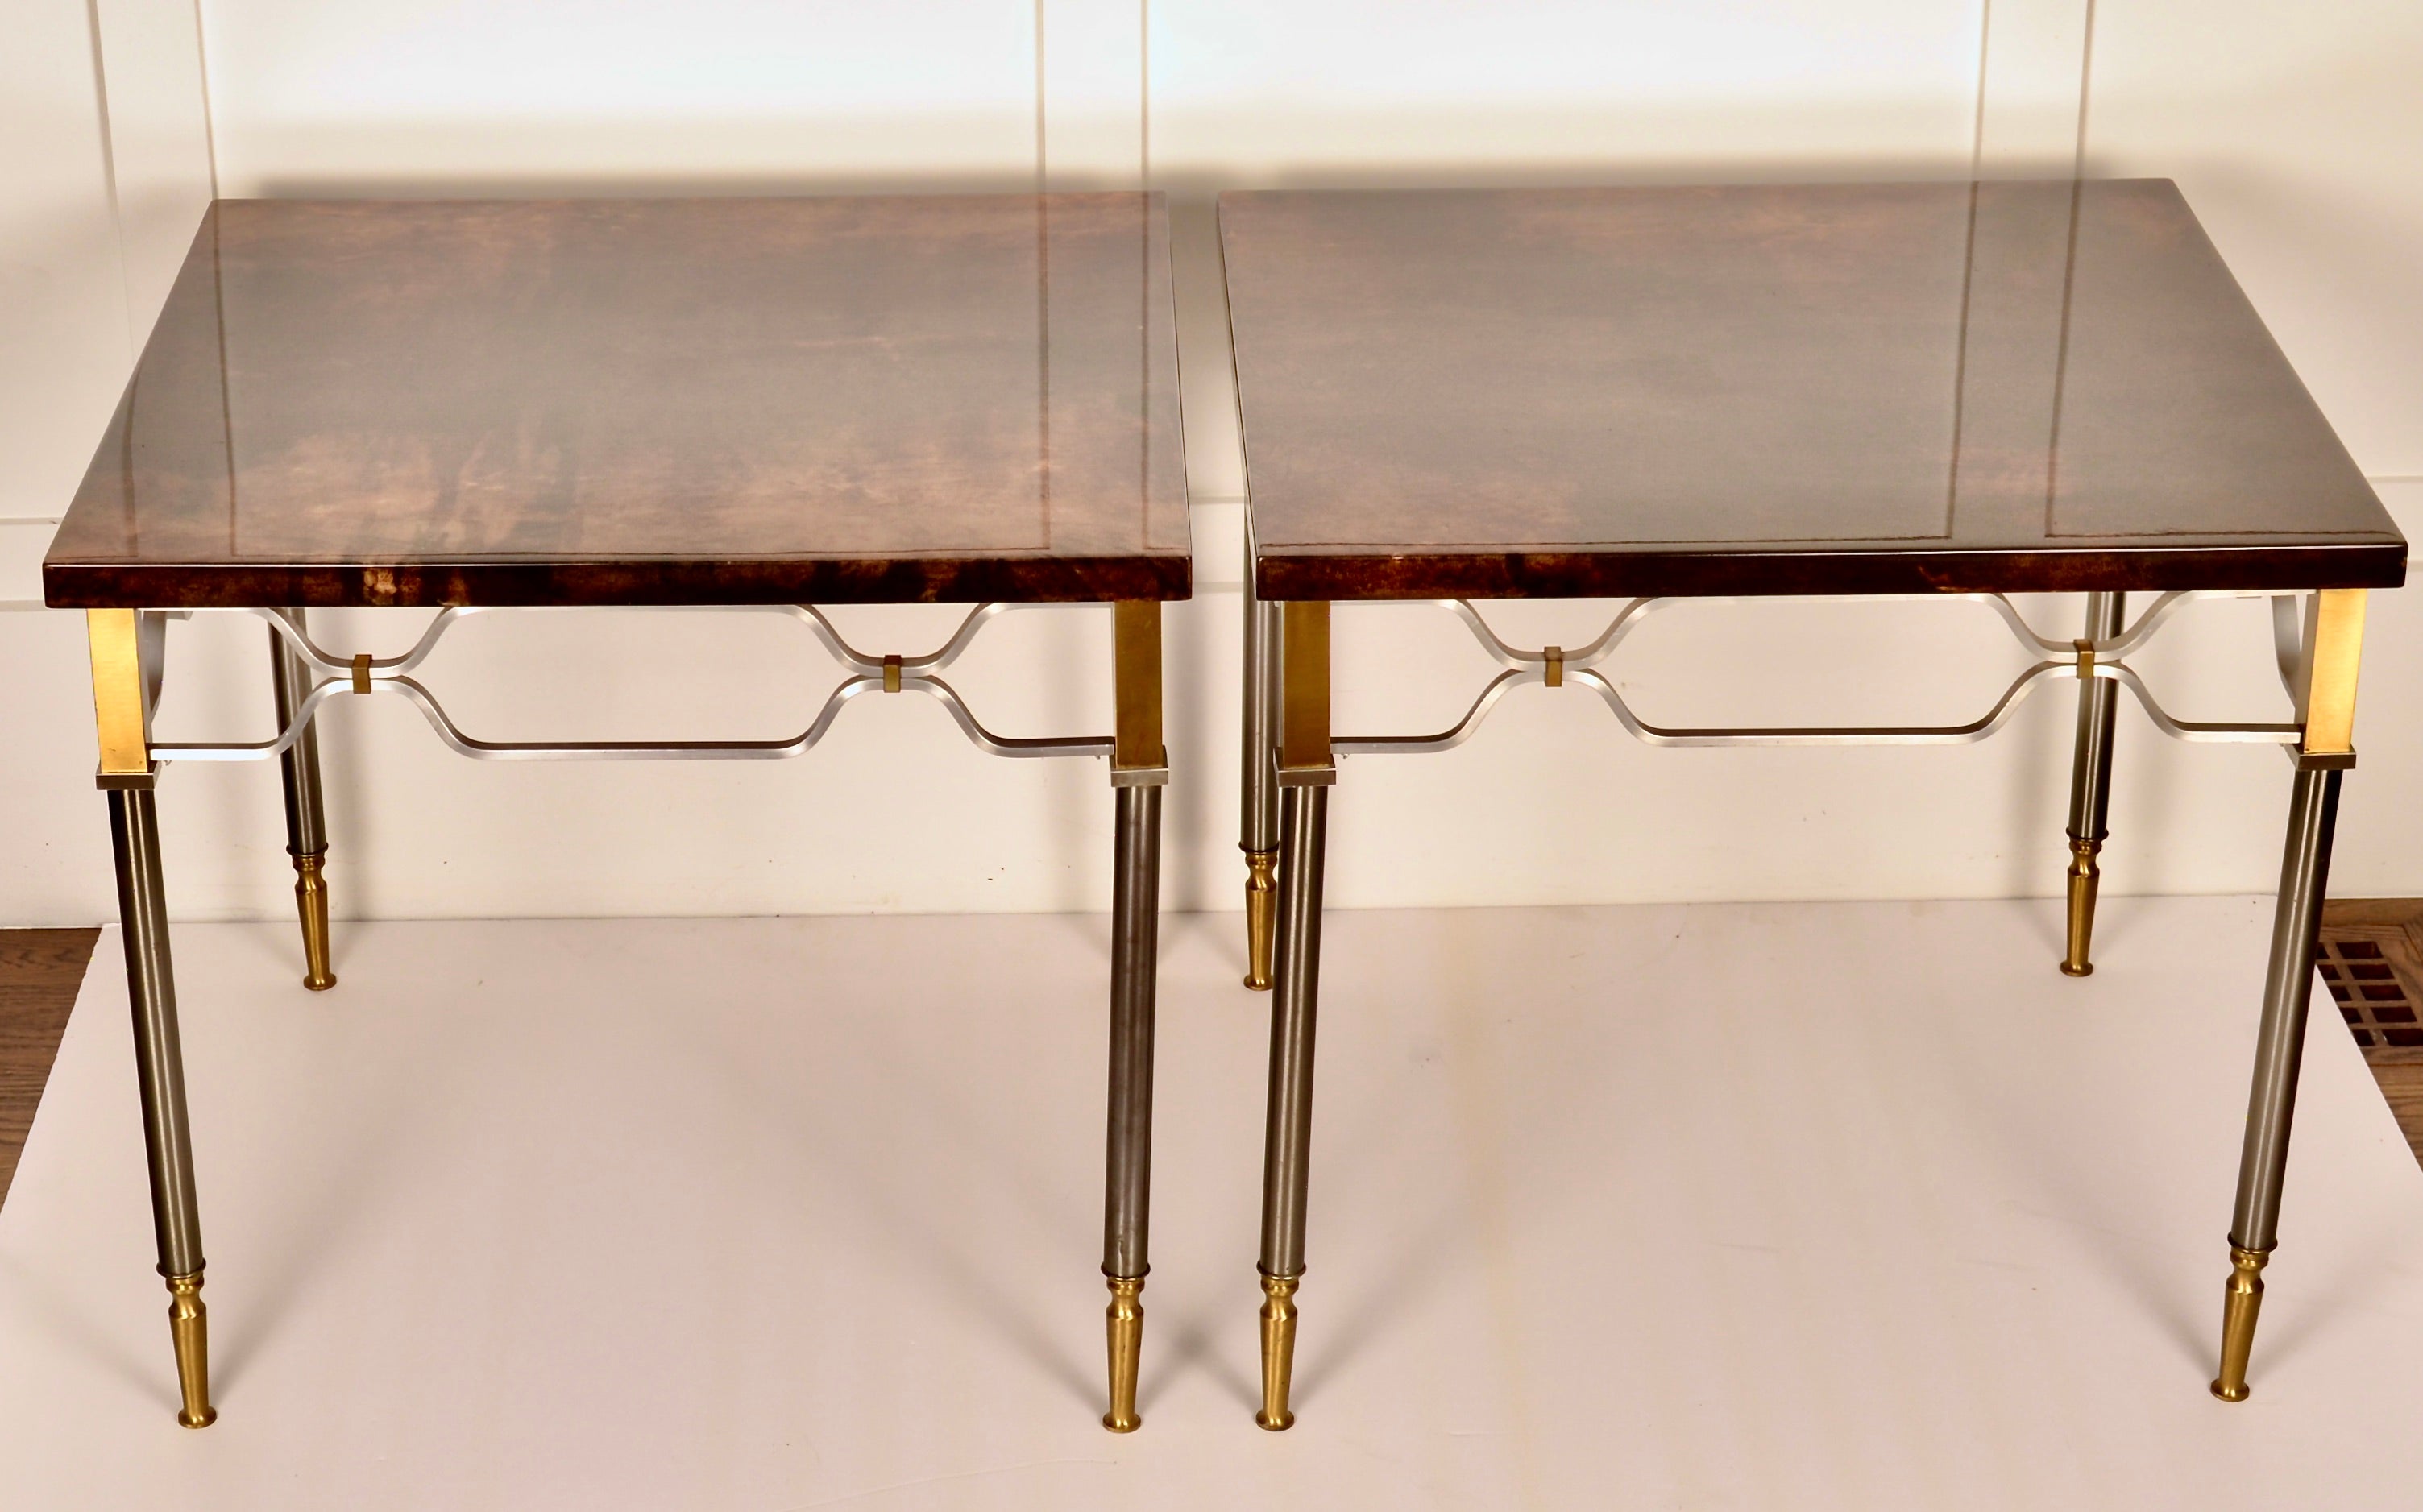 High style mixed metal bases on this pair of side tables by Aldo Tura. Beautifully patterned goat skin tops with super high gloss finish. Beautiful condition.